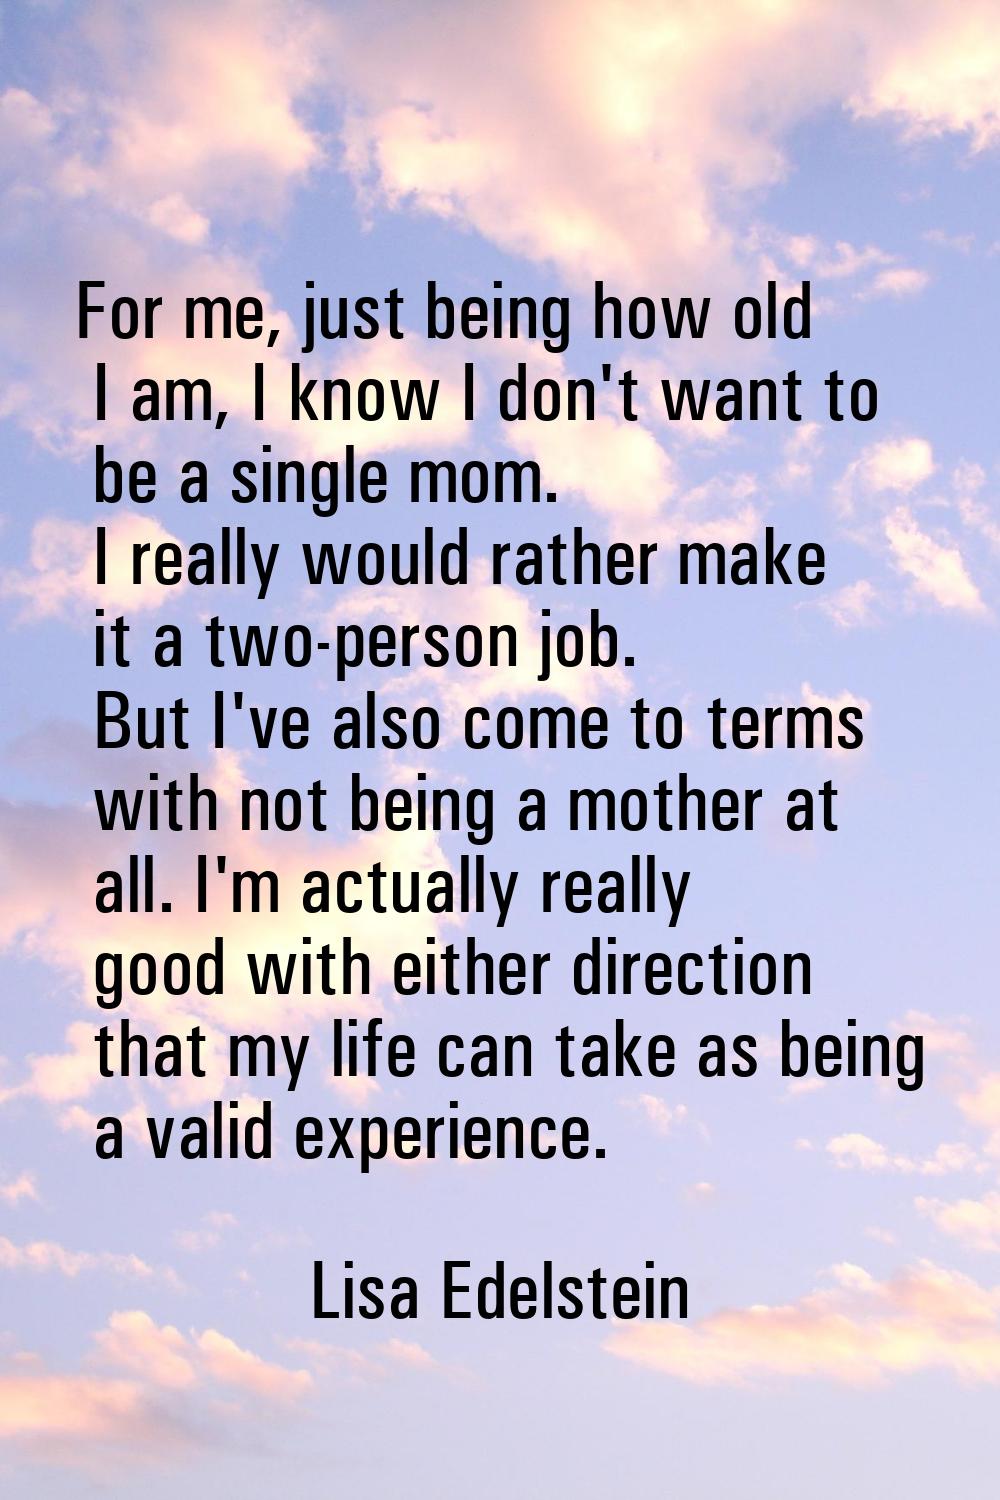 For me, just being how old I am, I know I don't want to be a single mom. I really would rather make